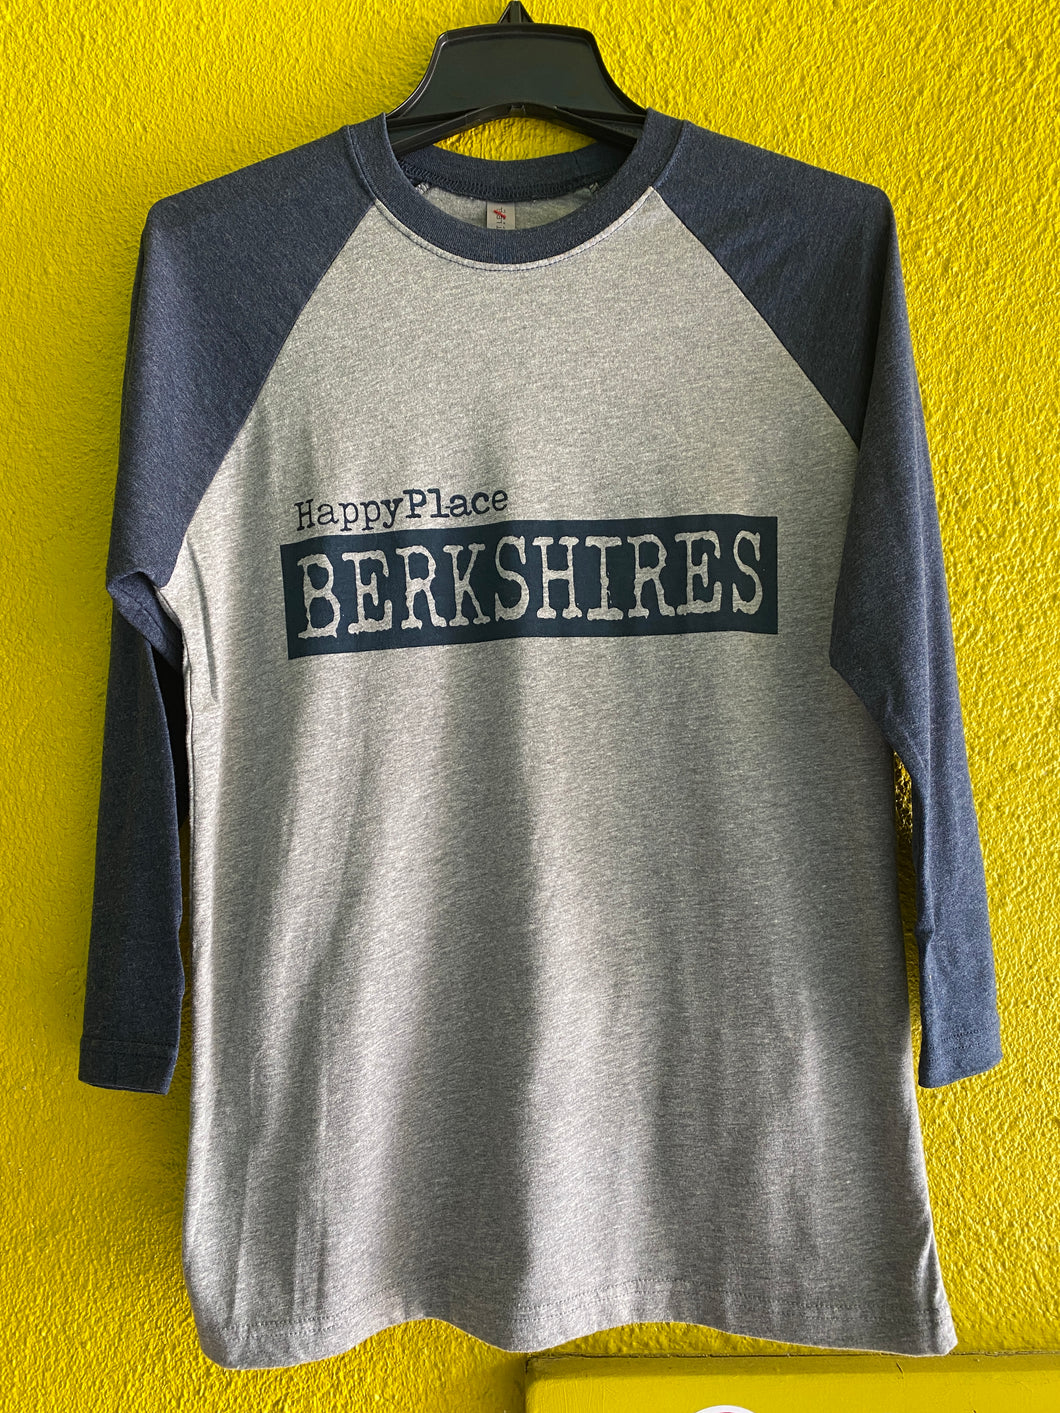 Unisex Baseball T-Shirt in Grey and Blue.